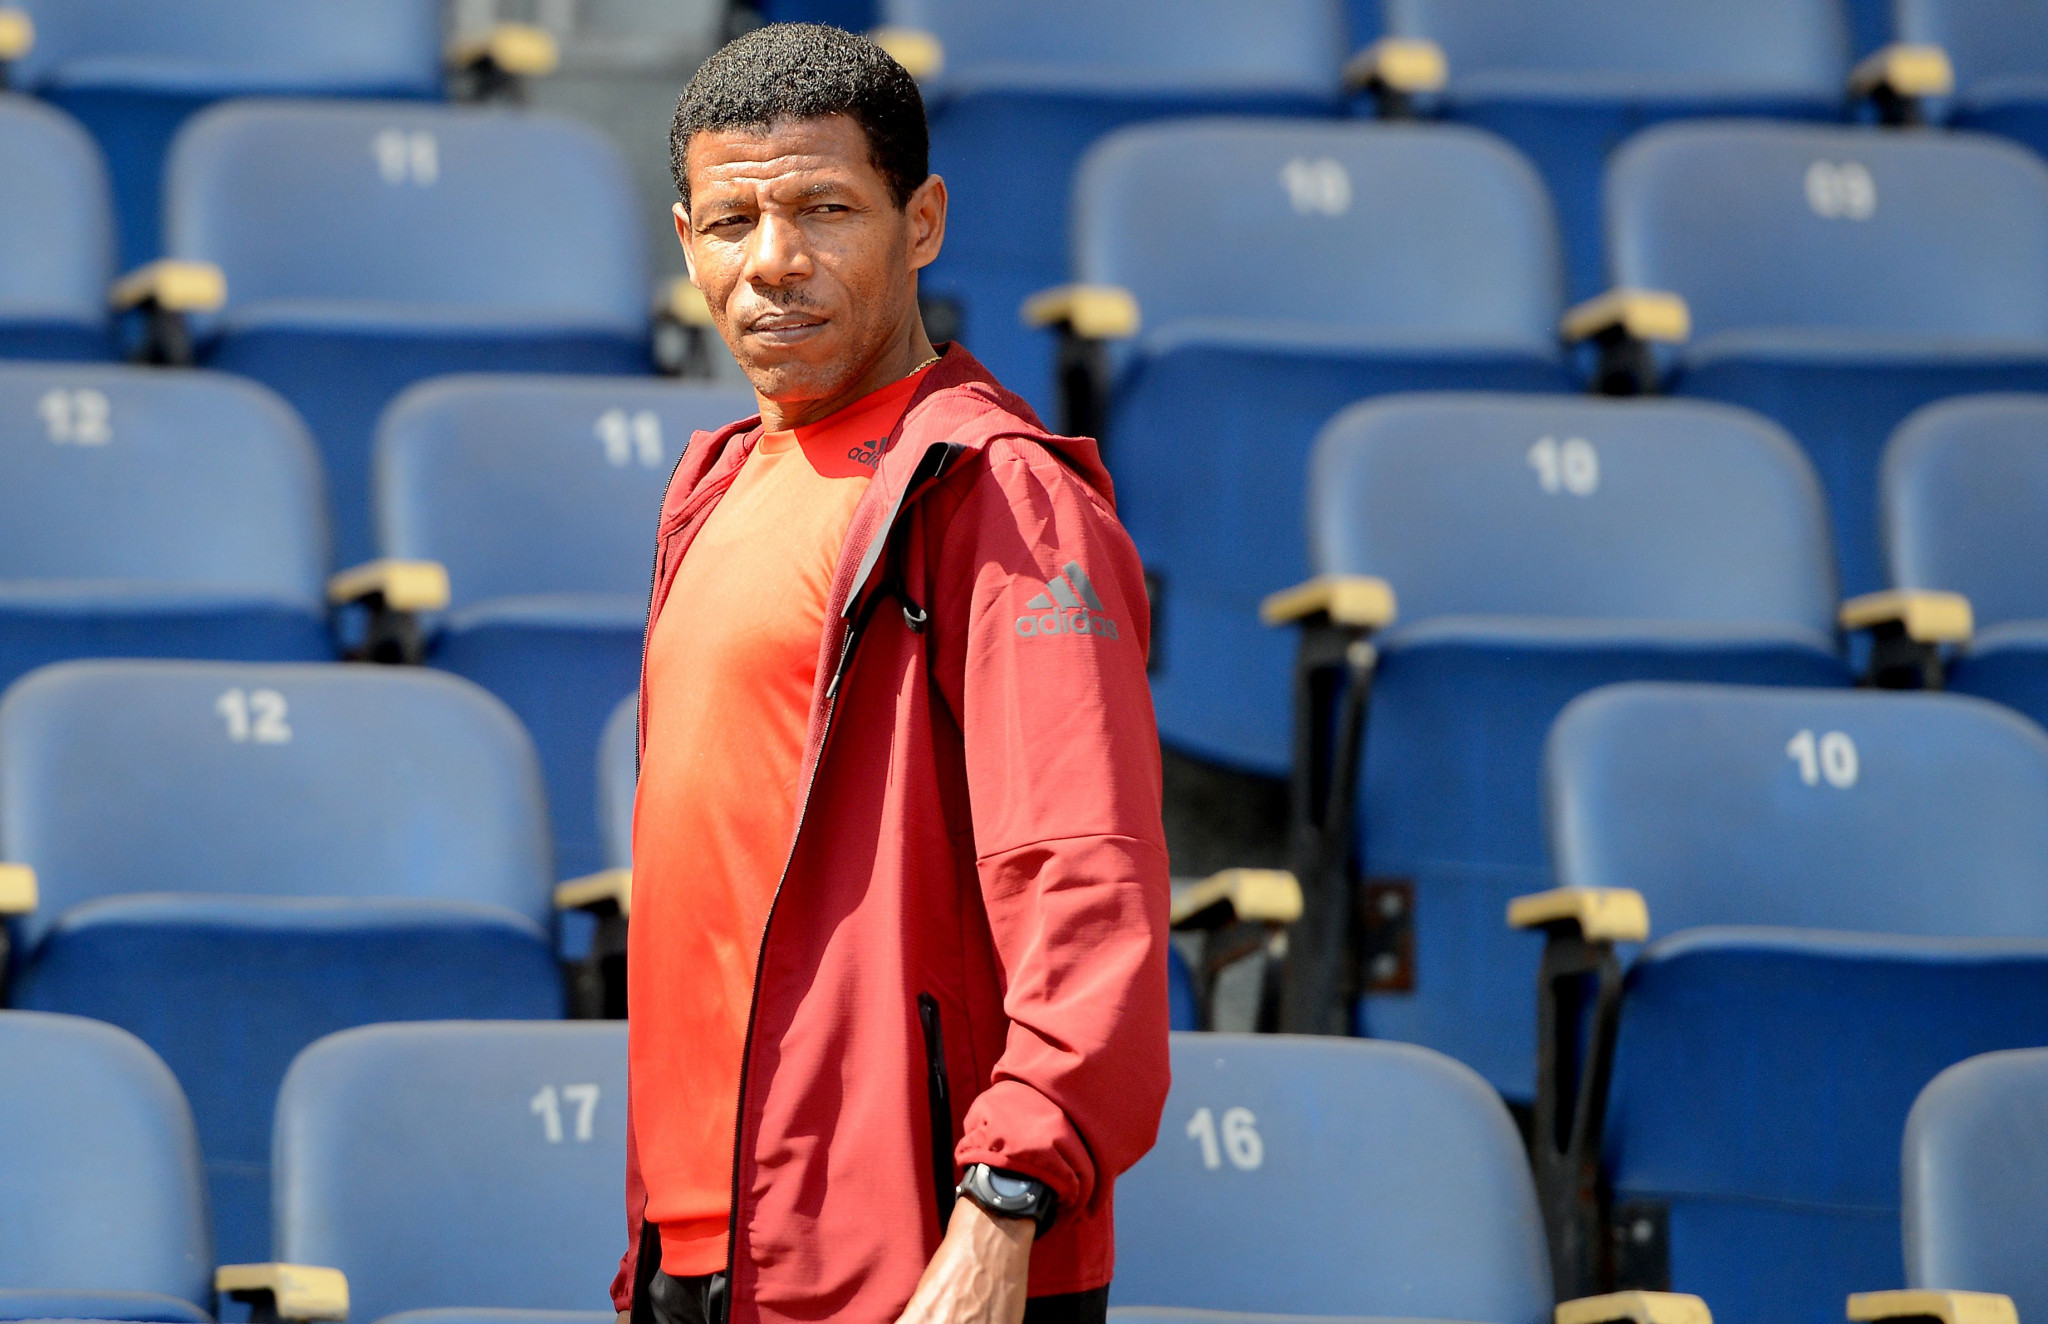 Haile Gebrselassie launched a scathing response to allegations made by Mo Farah ©Getty Images